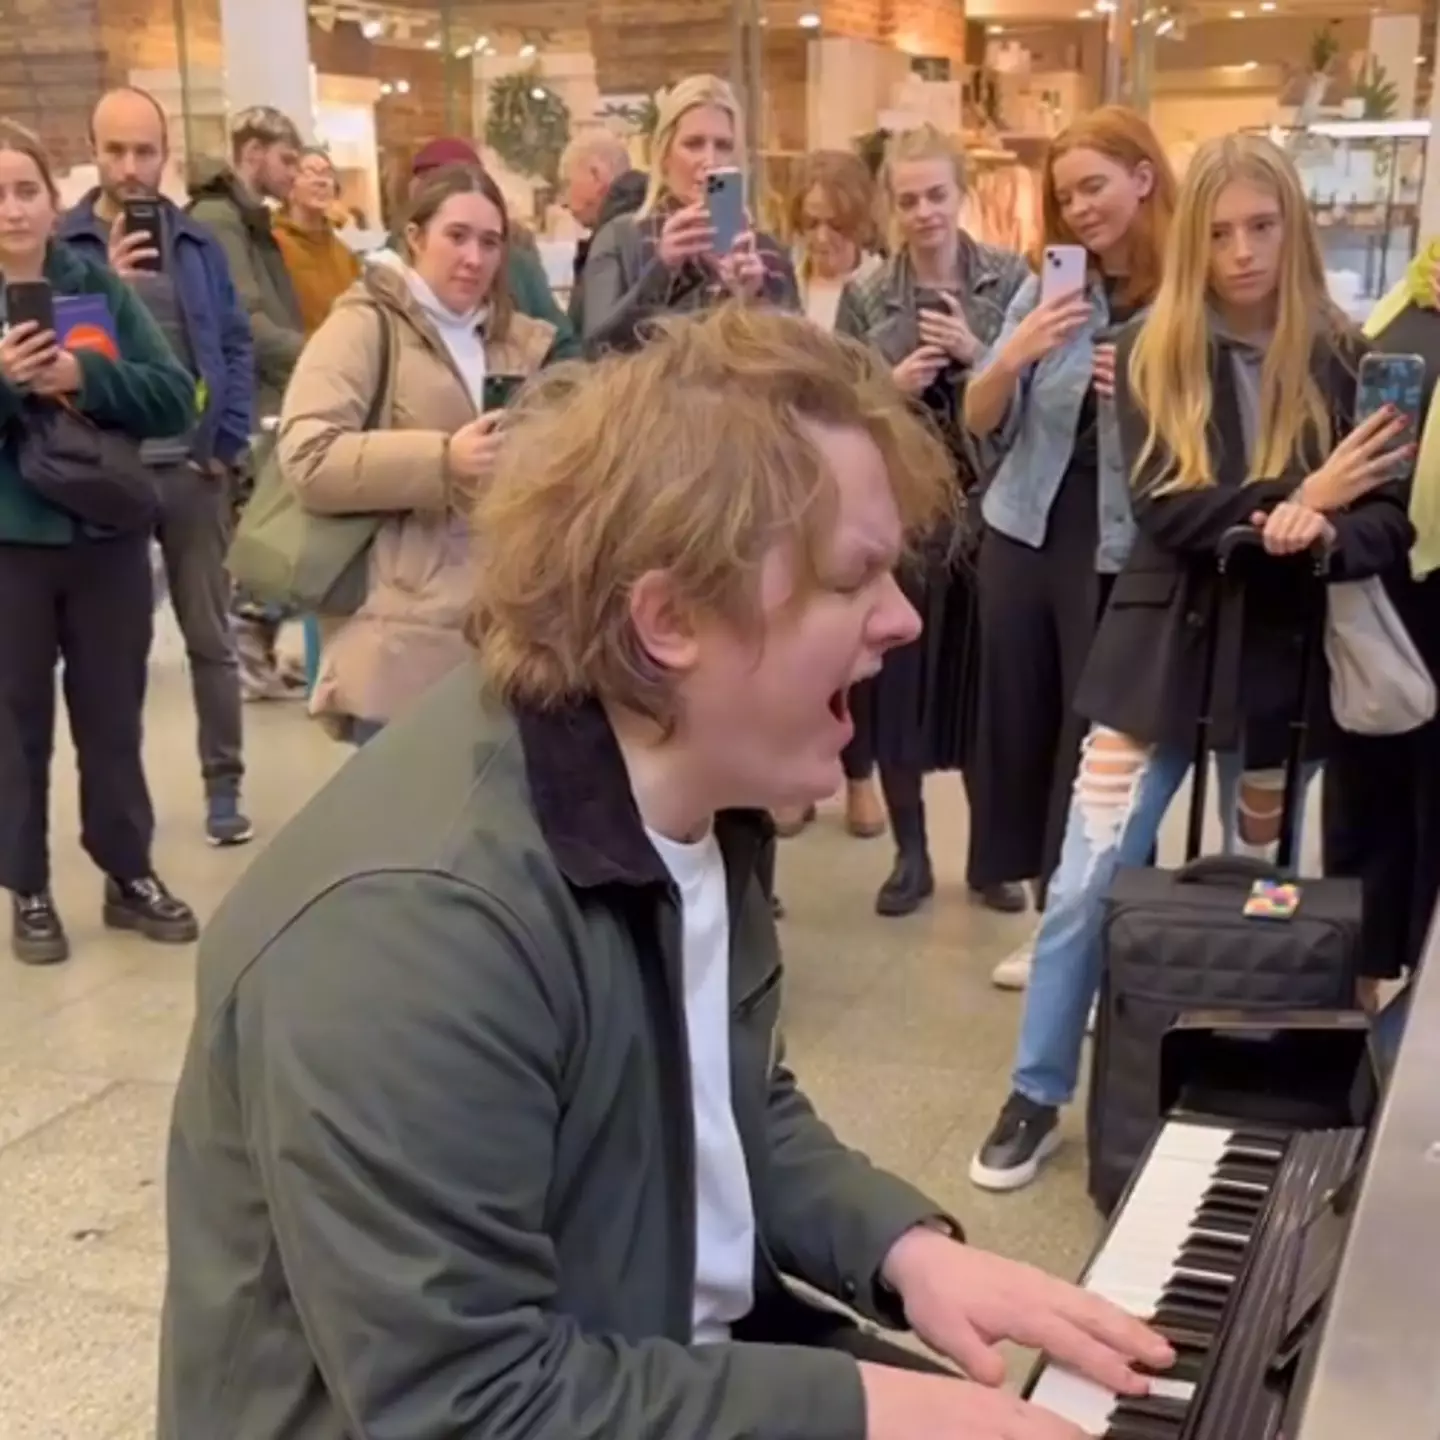 Lewis Capaldi performed his new single to commuters.